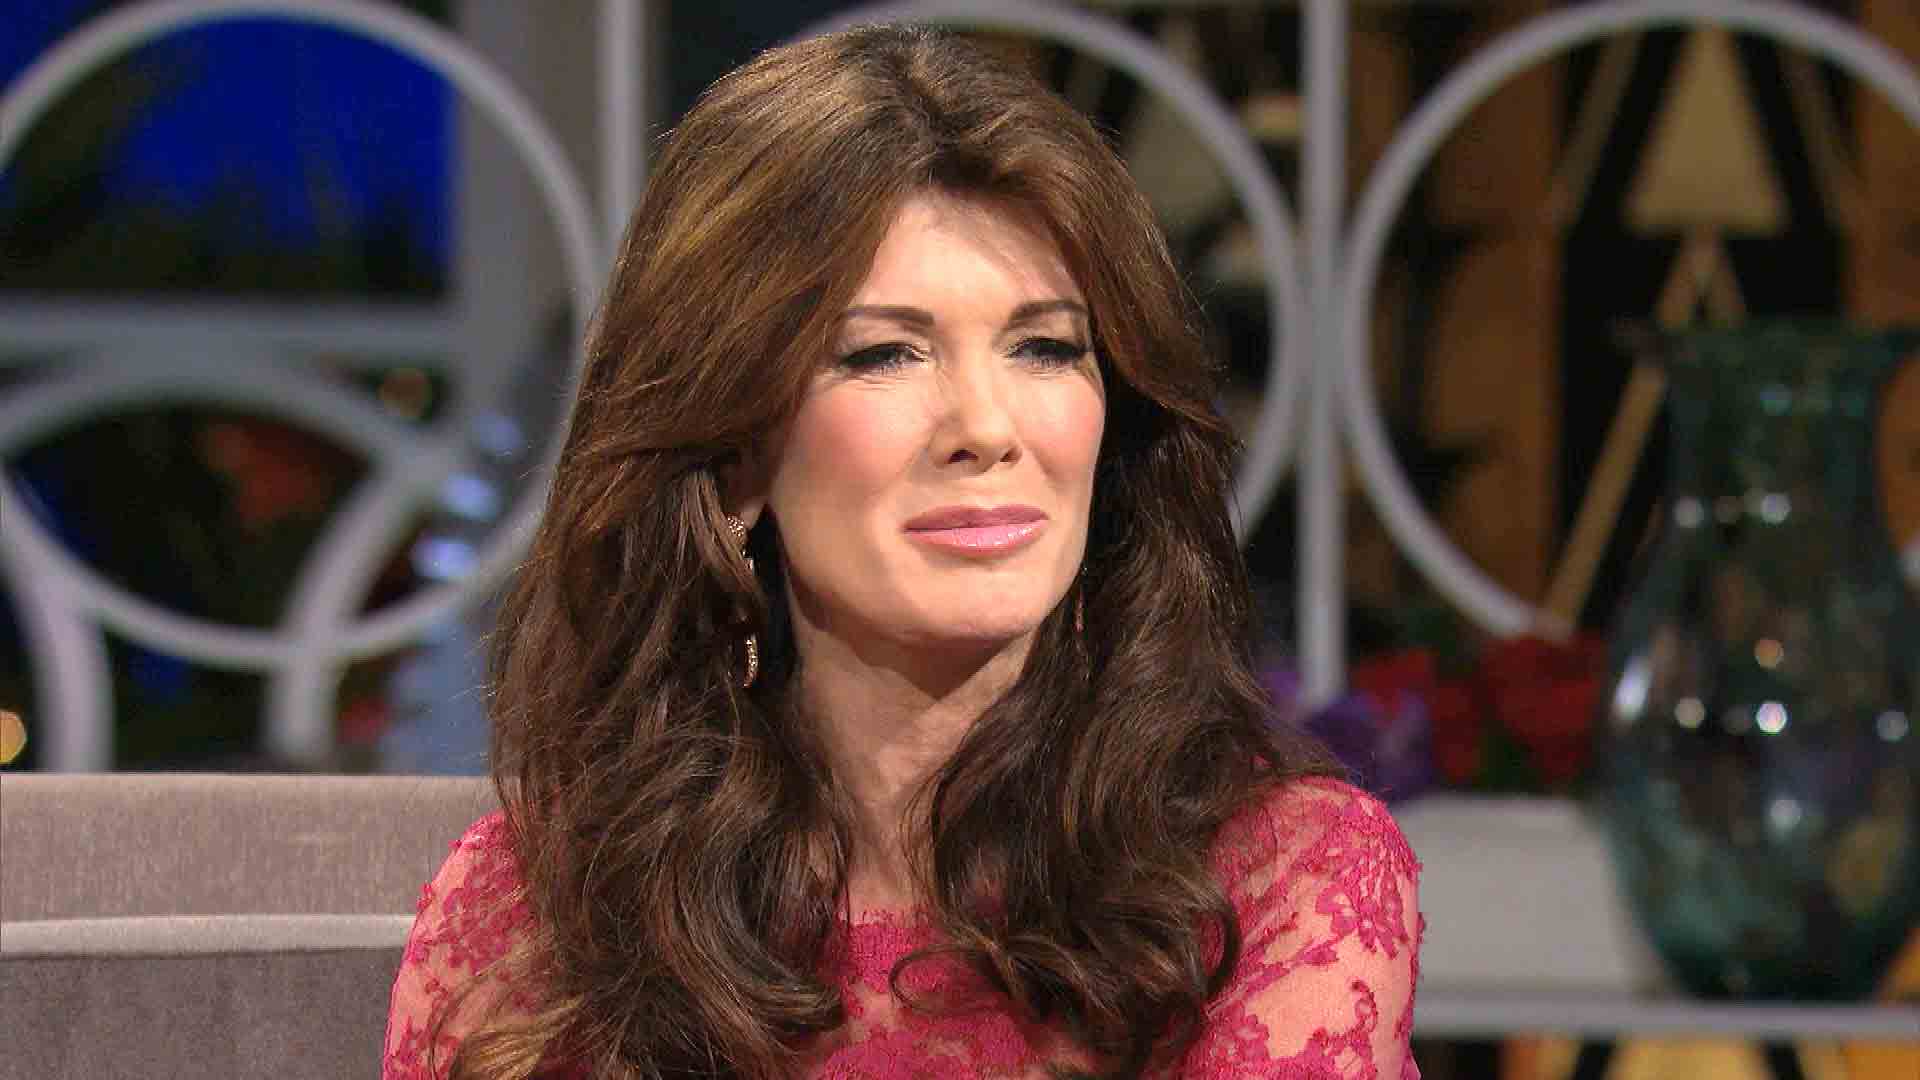 Watch Did Lisa Vanderpump Live In The Valley The Real Housewives Of Beverly Hills Season 4 Episode Video